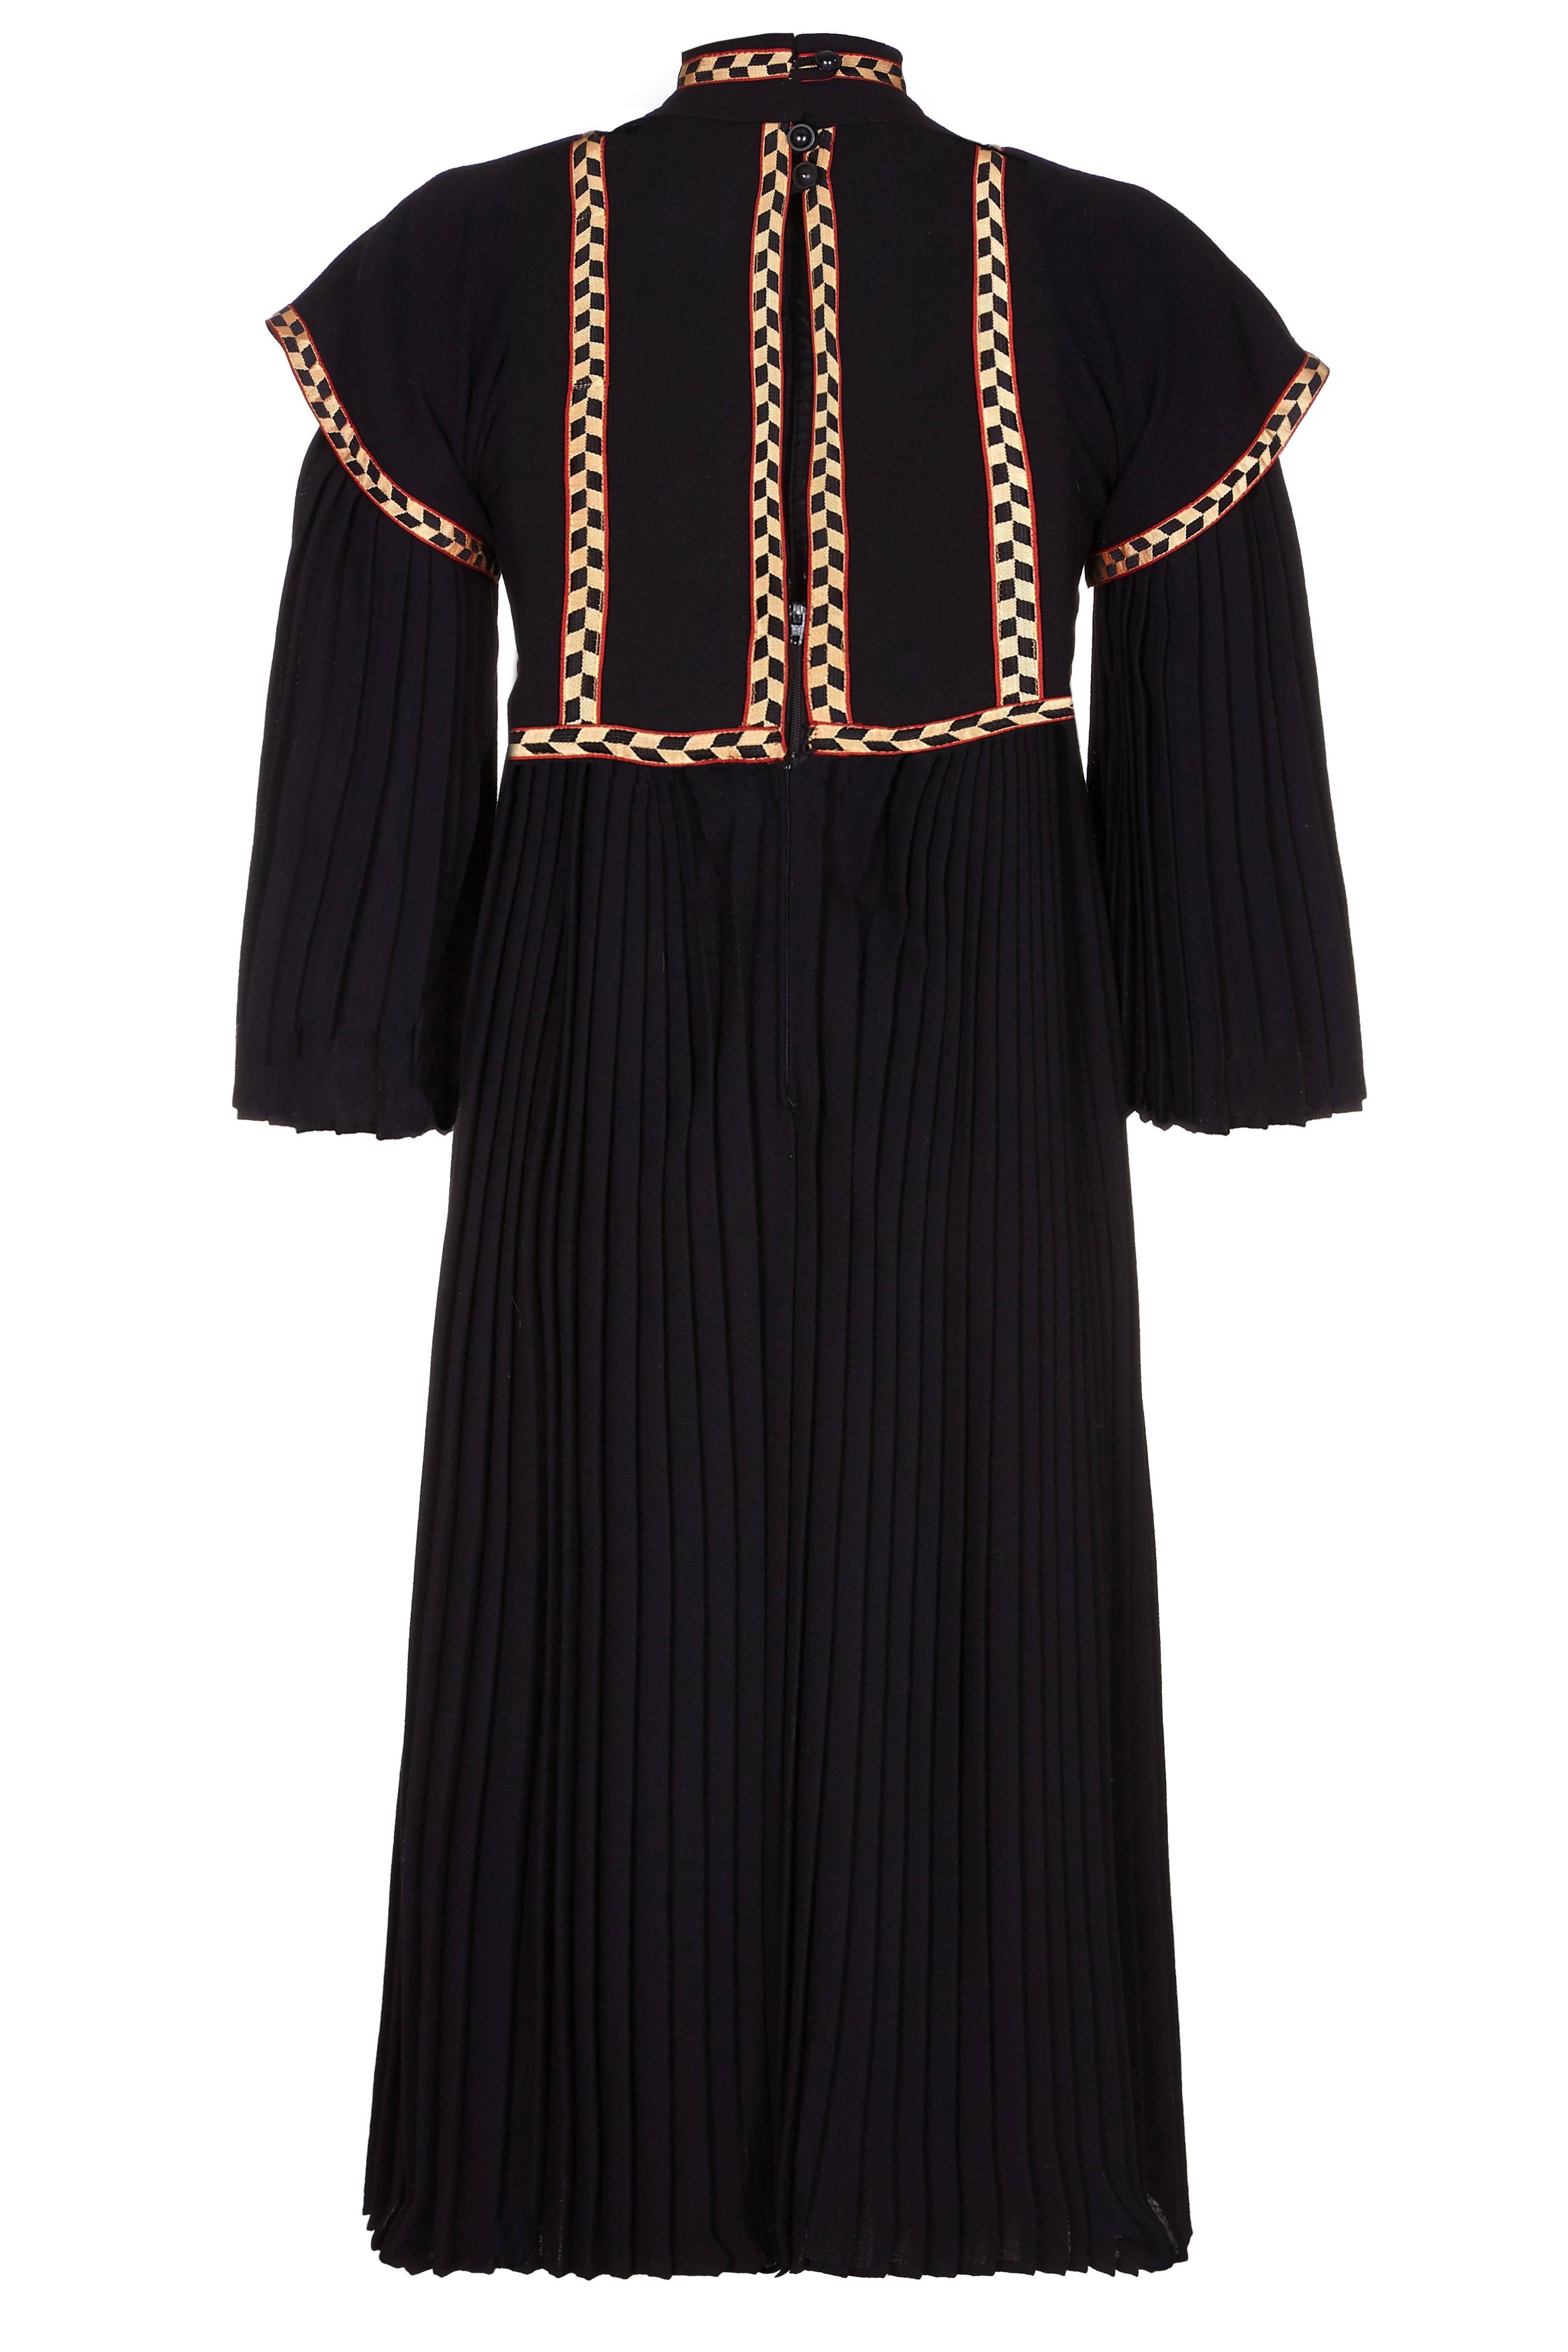 Incredible vintage Bill Gibb black wool renaissance style dress with pleated skirt and sleeves and structured bodice with applique ribbon.  It fastens at the back of the skirt with a zip and has three buttons and loops at the back of the high neck